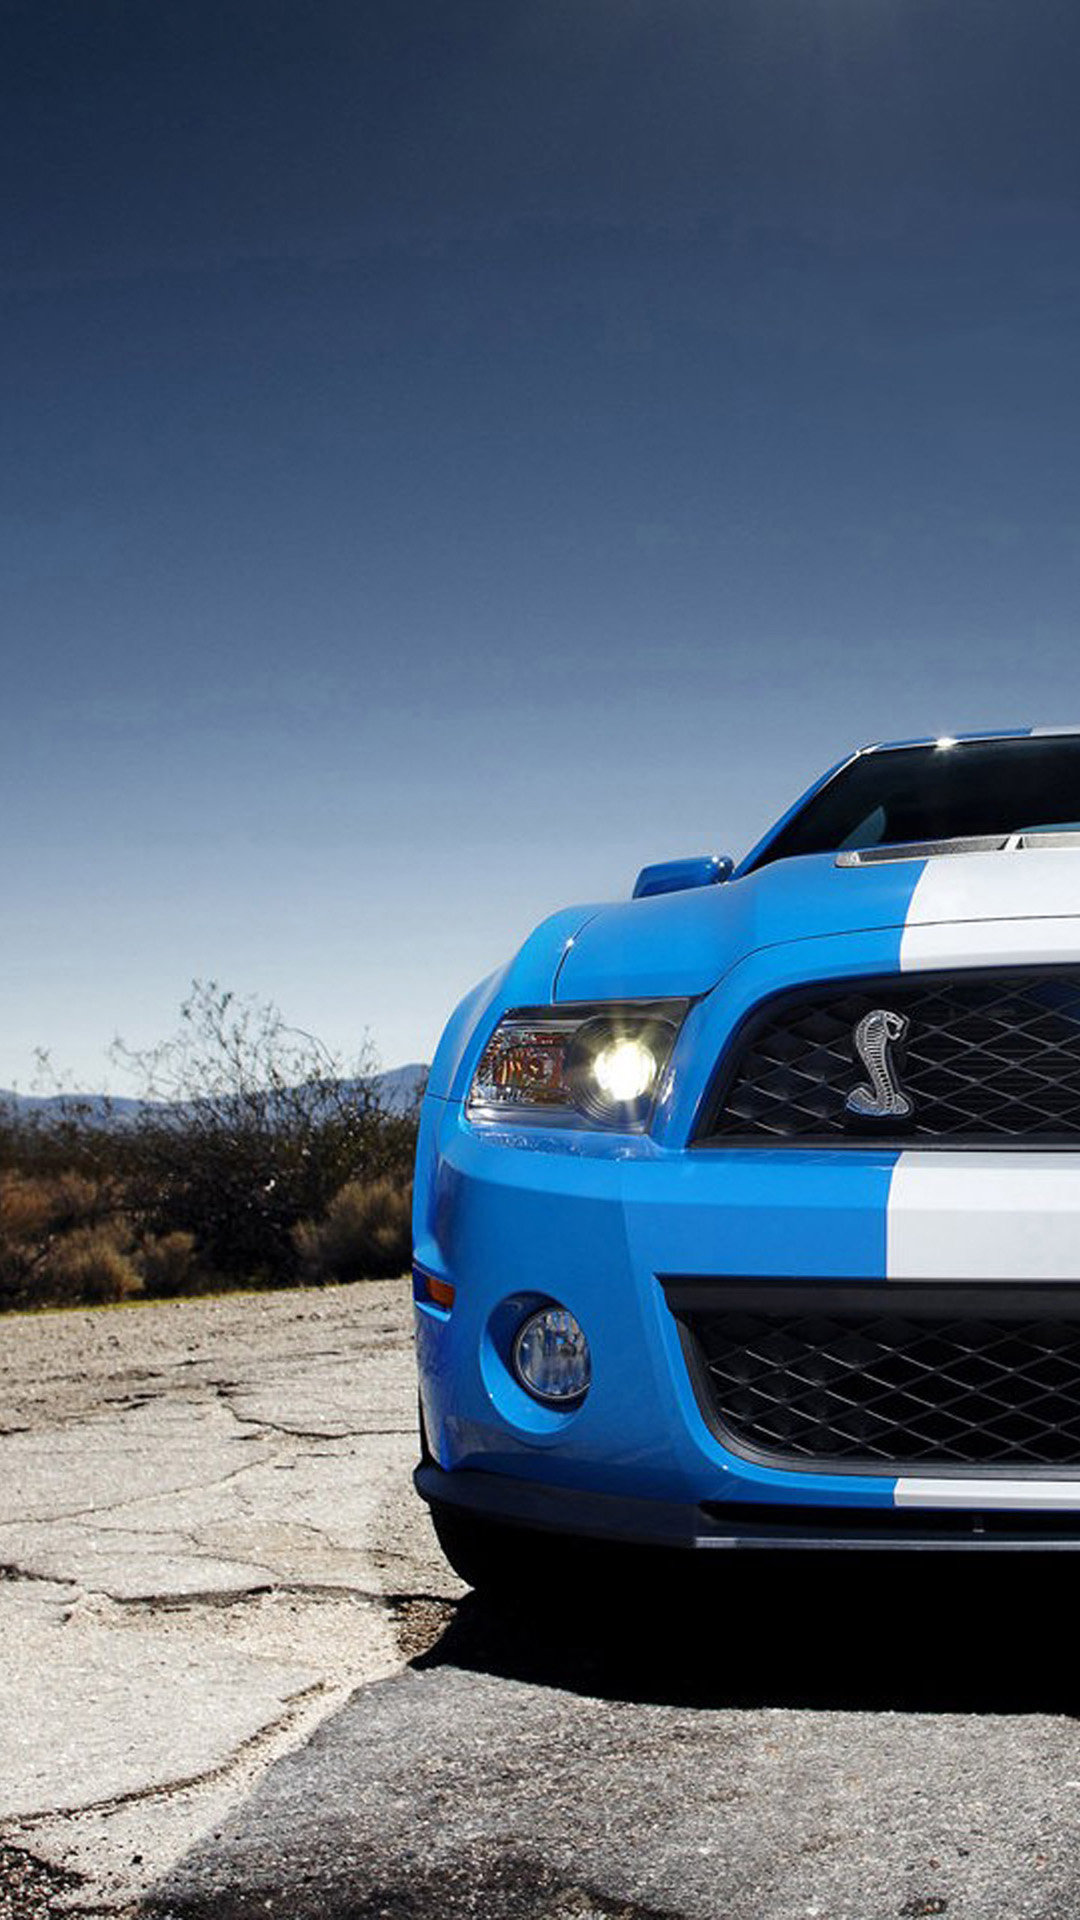 Ford Mustang Hd Wallpaper Iphone - Shelby Gt 500 2010 - HD Wallpaper 